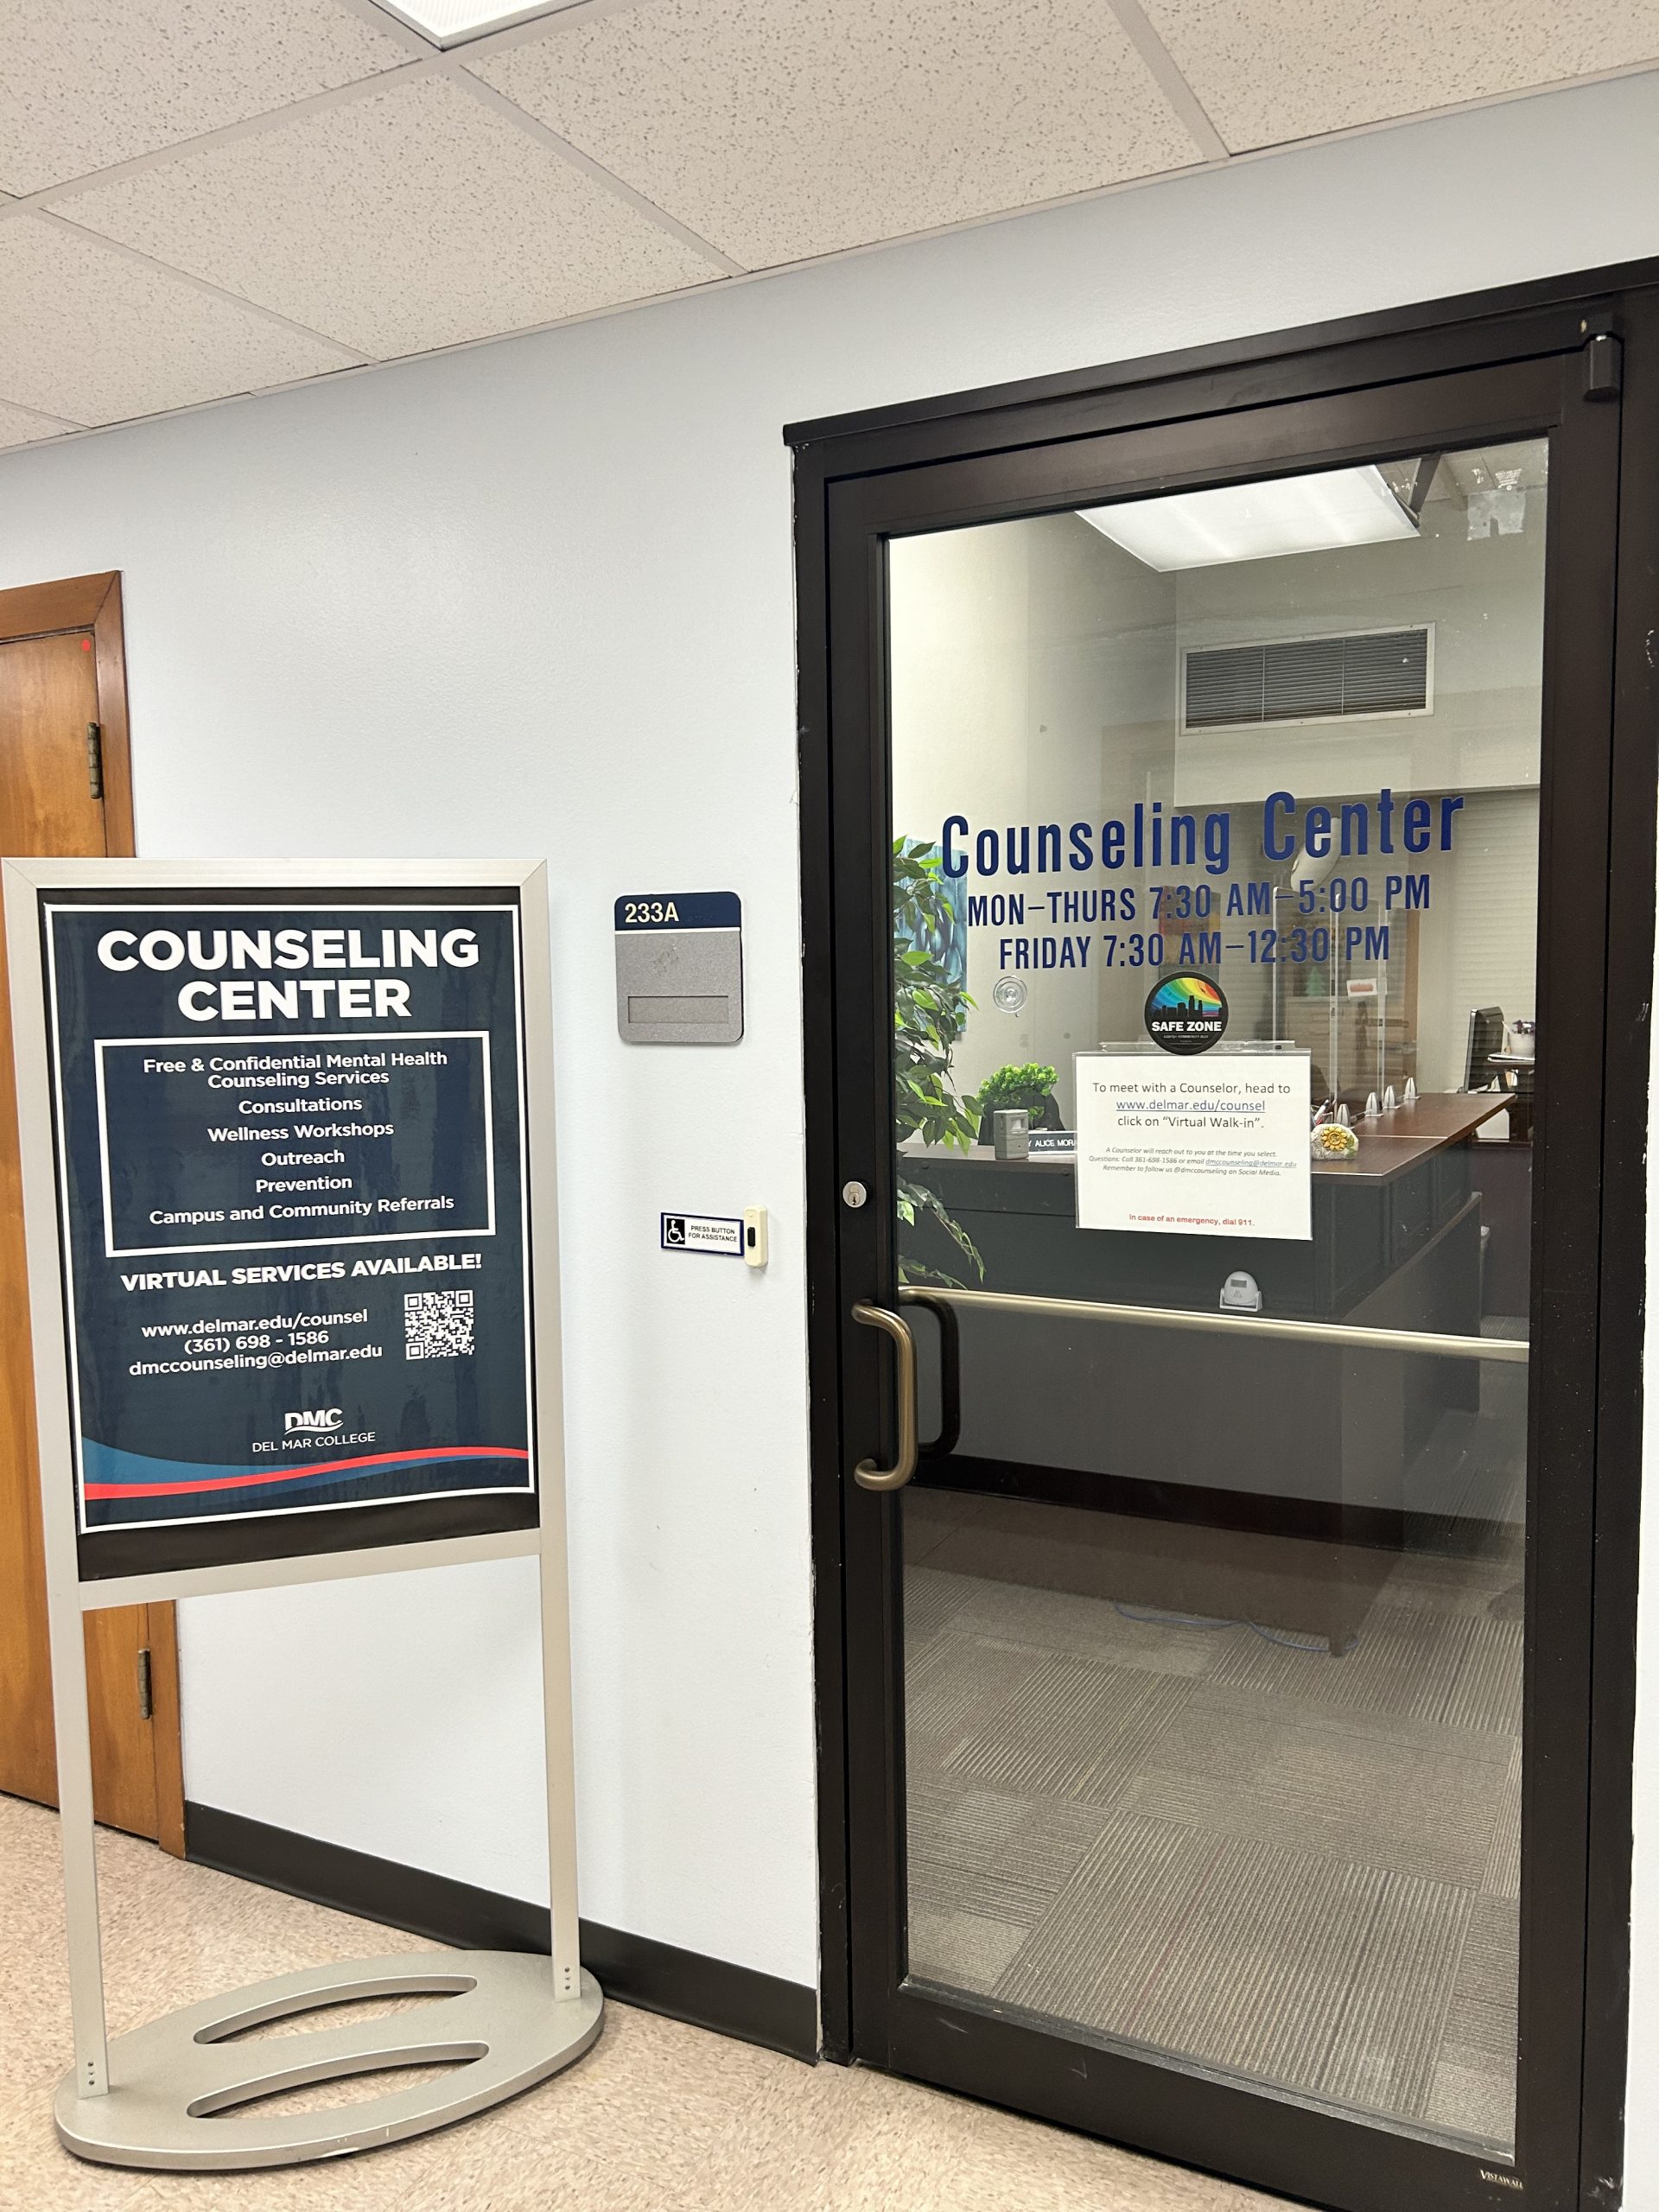 DMC Counseling Center offers safe space for students